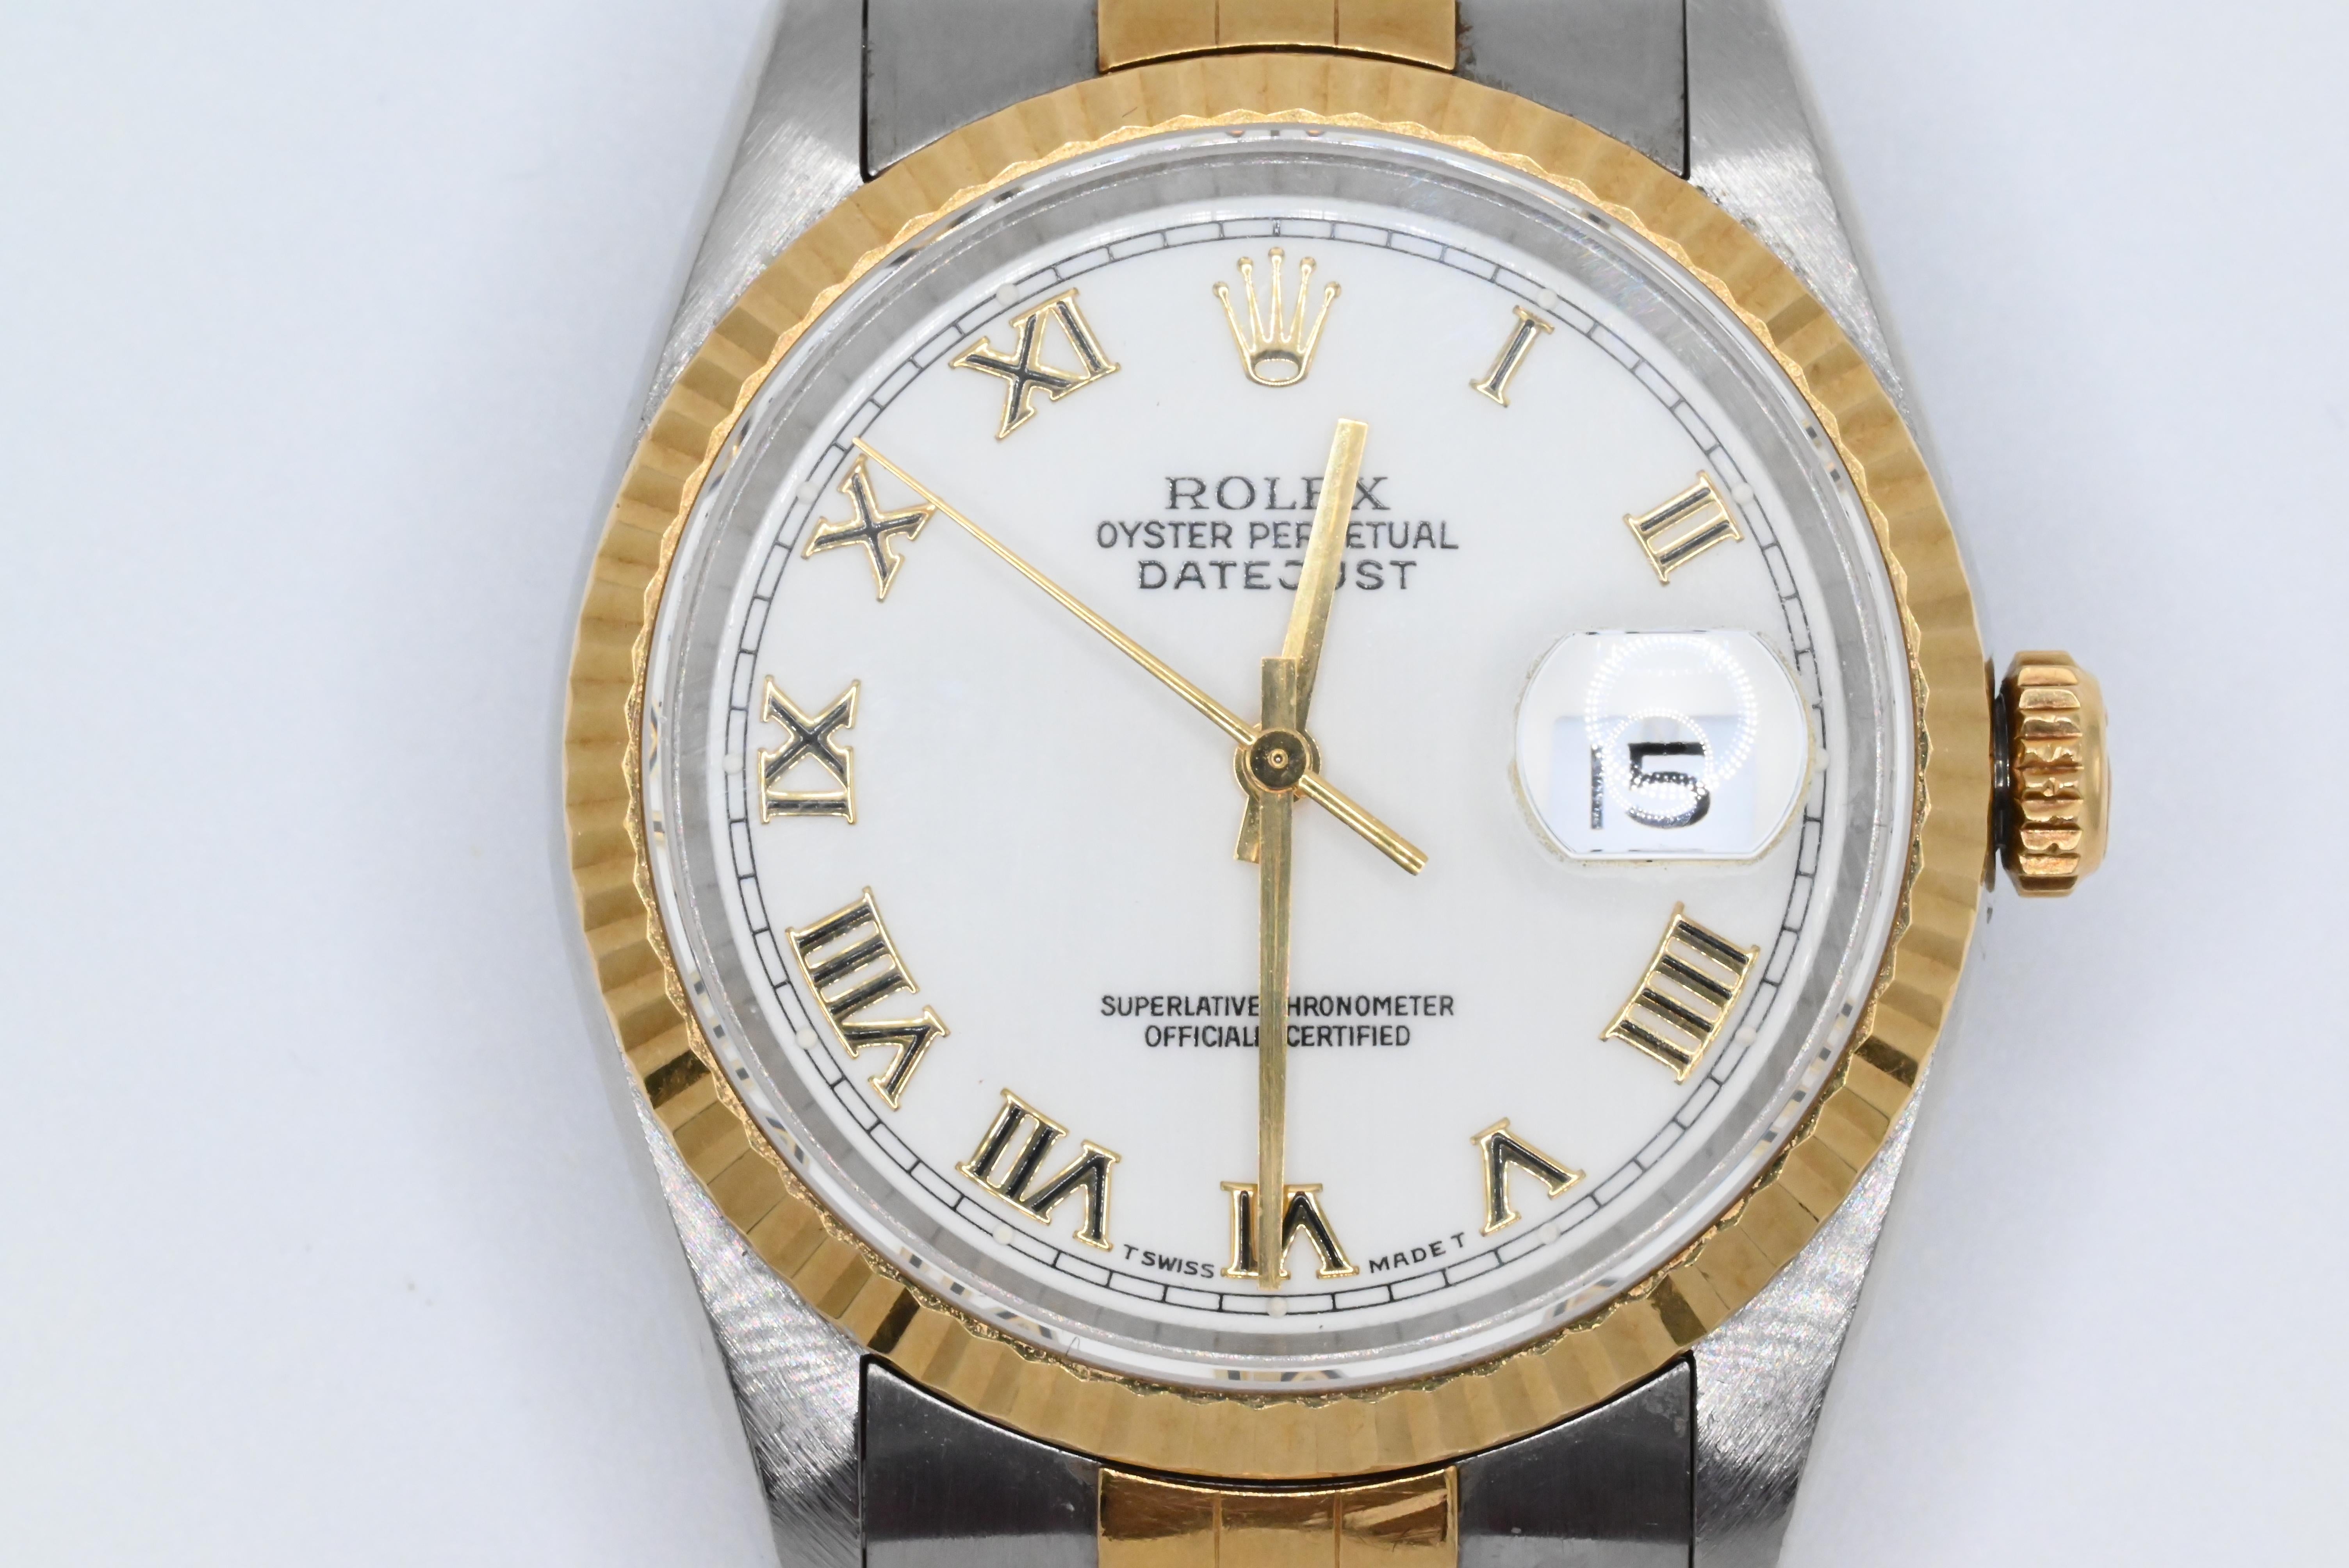 Exceptional Rolex Perpetual Oyster Two Tone Roman Numeral Dial Watch 1